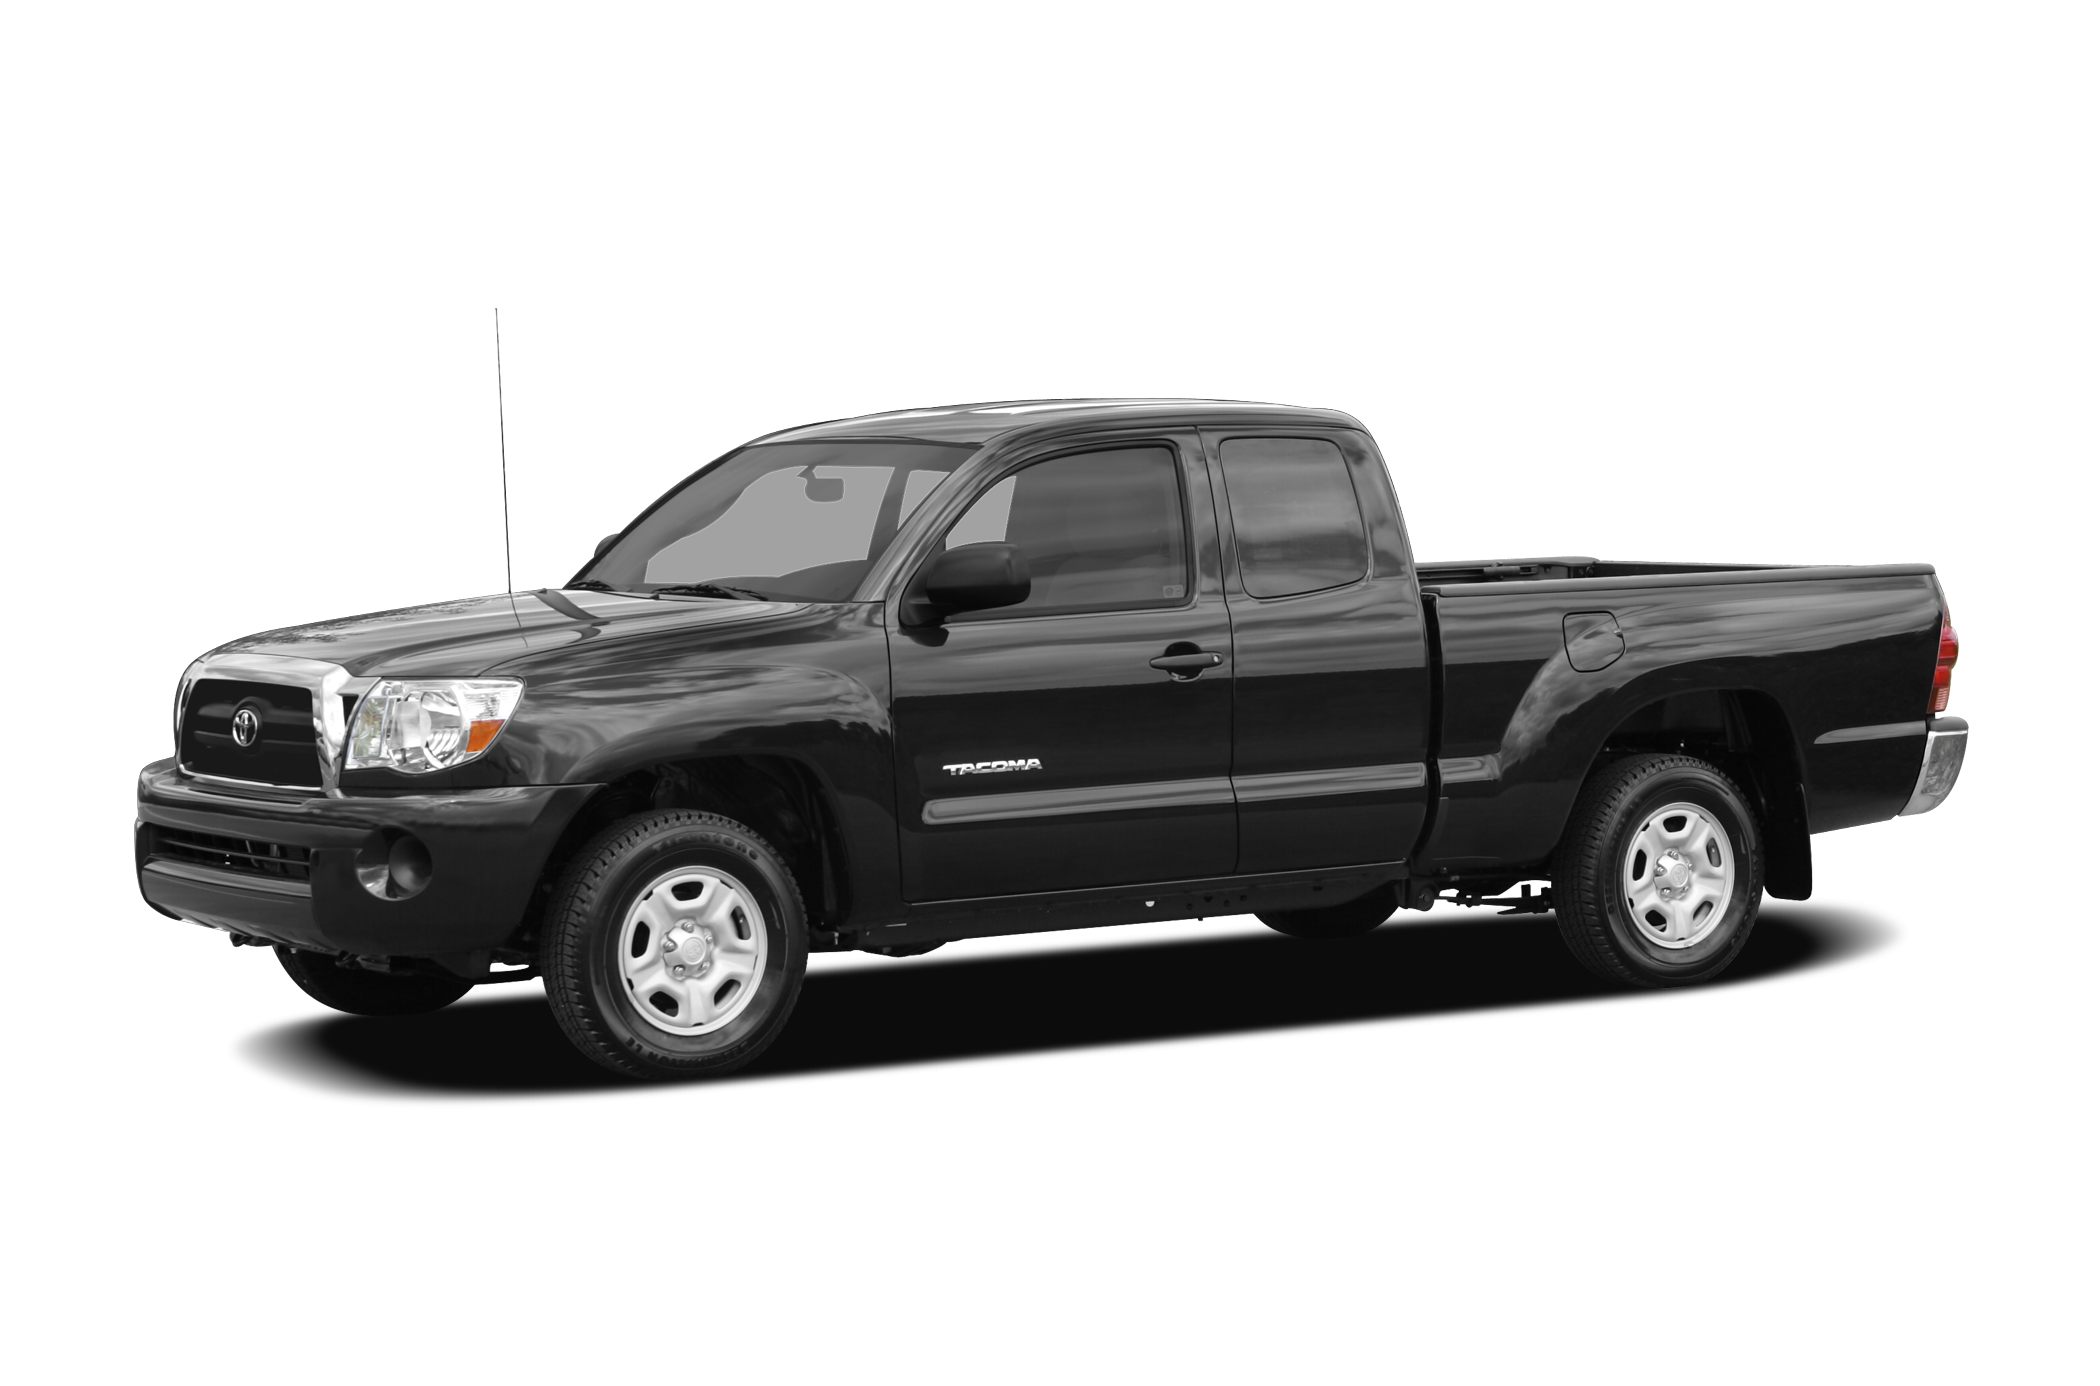 08 Toyota Tacoma X Runner V6 4x2 Access Cab 127 2 In Wb Pictures